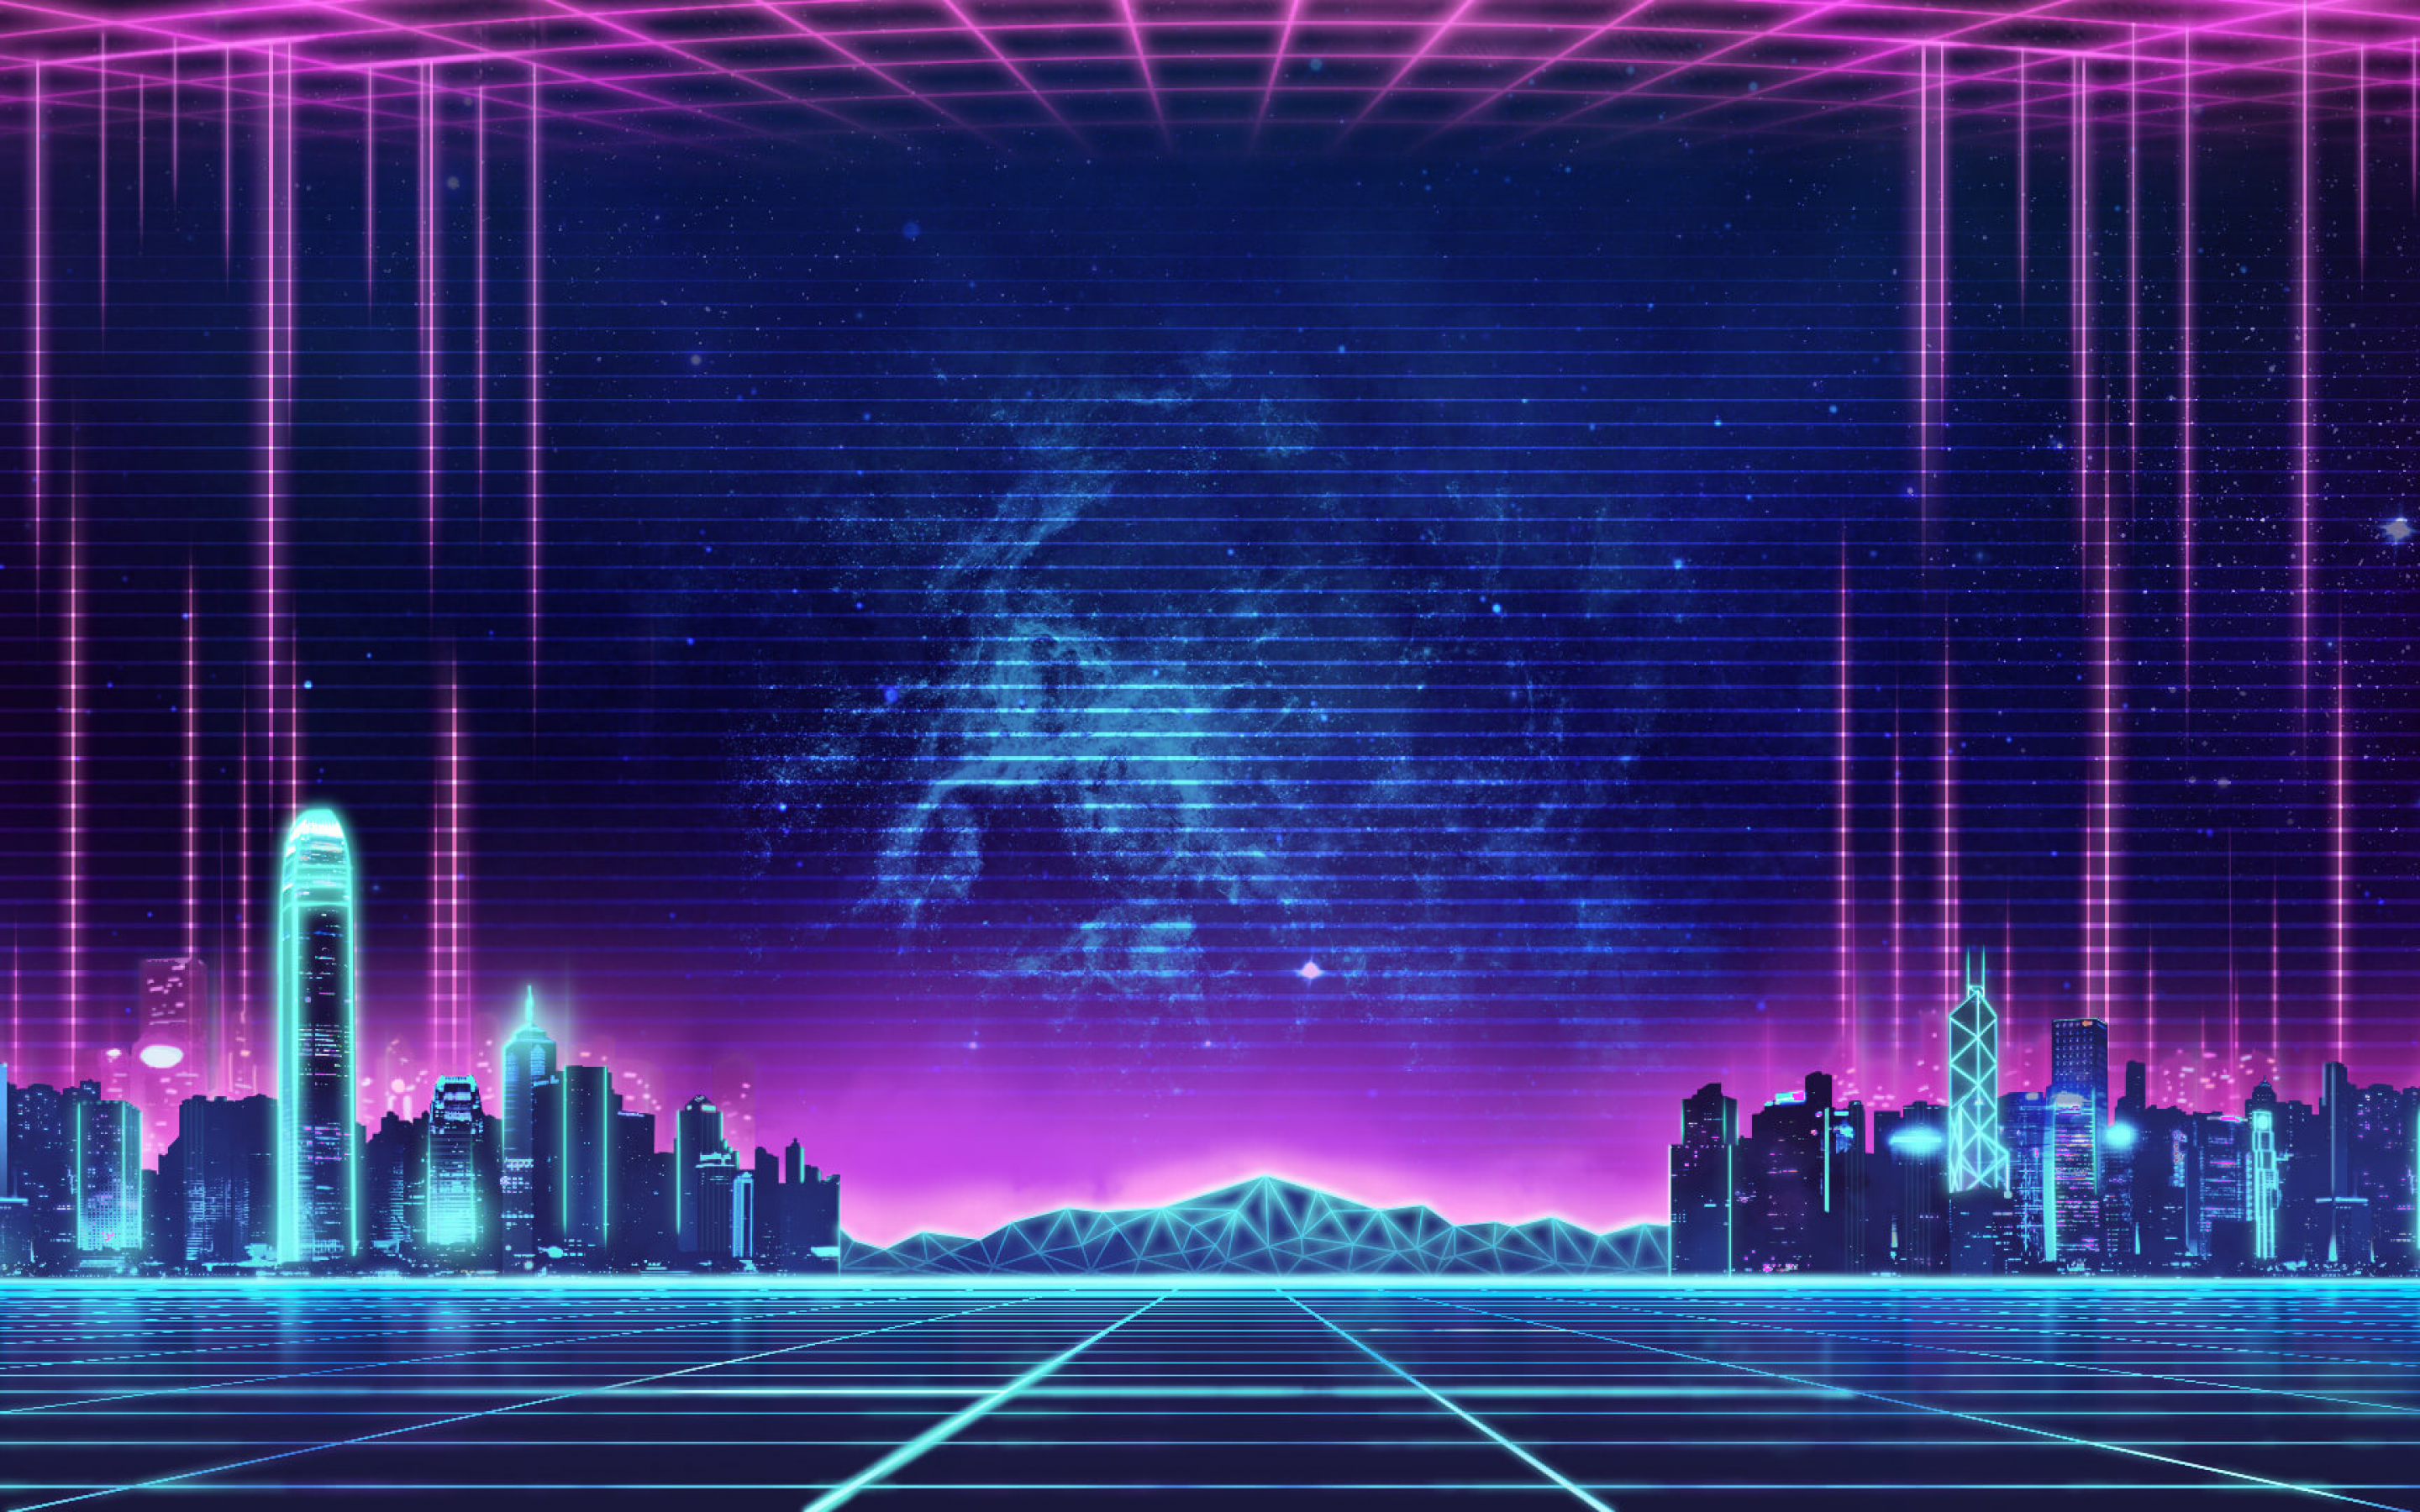 Download 2880x1800 Synthwave, Music, Retro, Neon City Wallpaper for MacBook Pro 15 inch